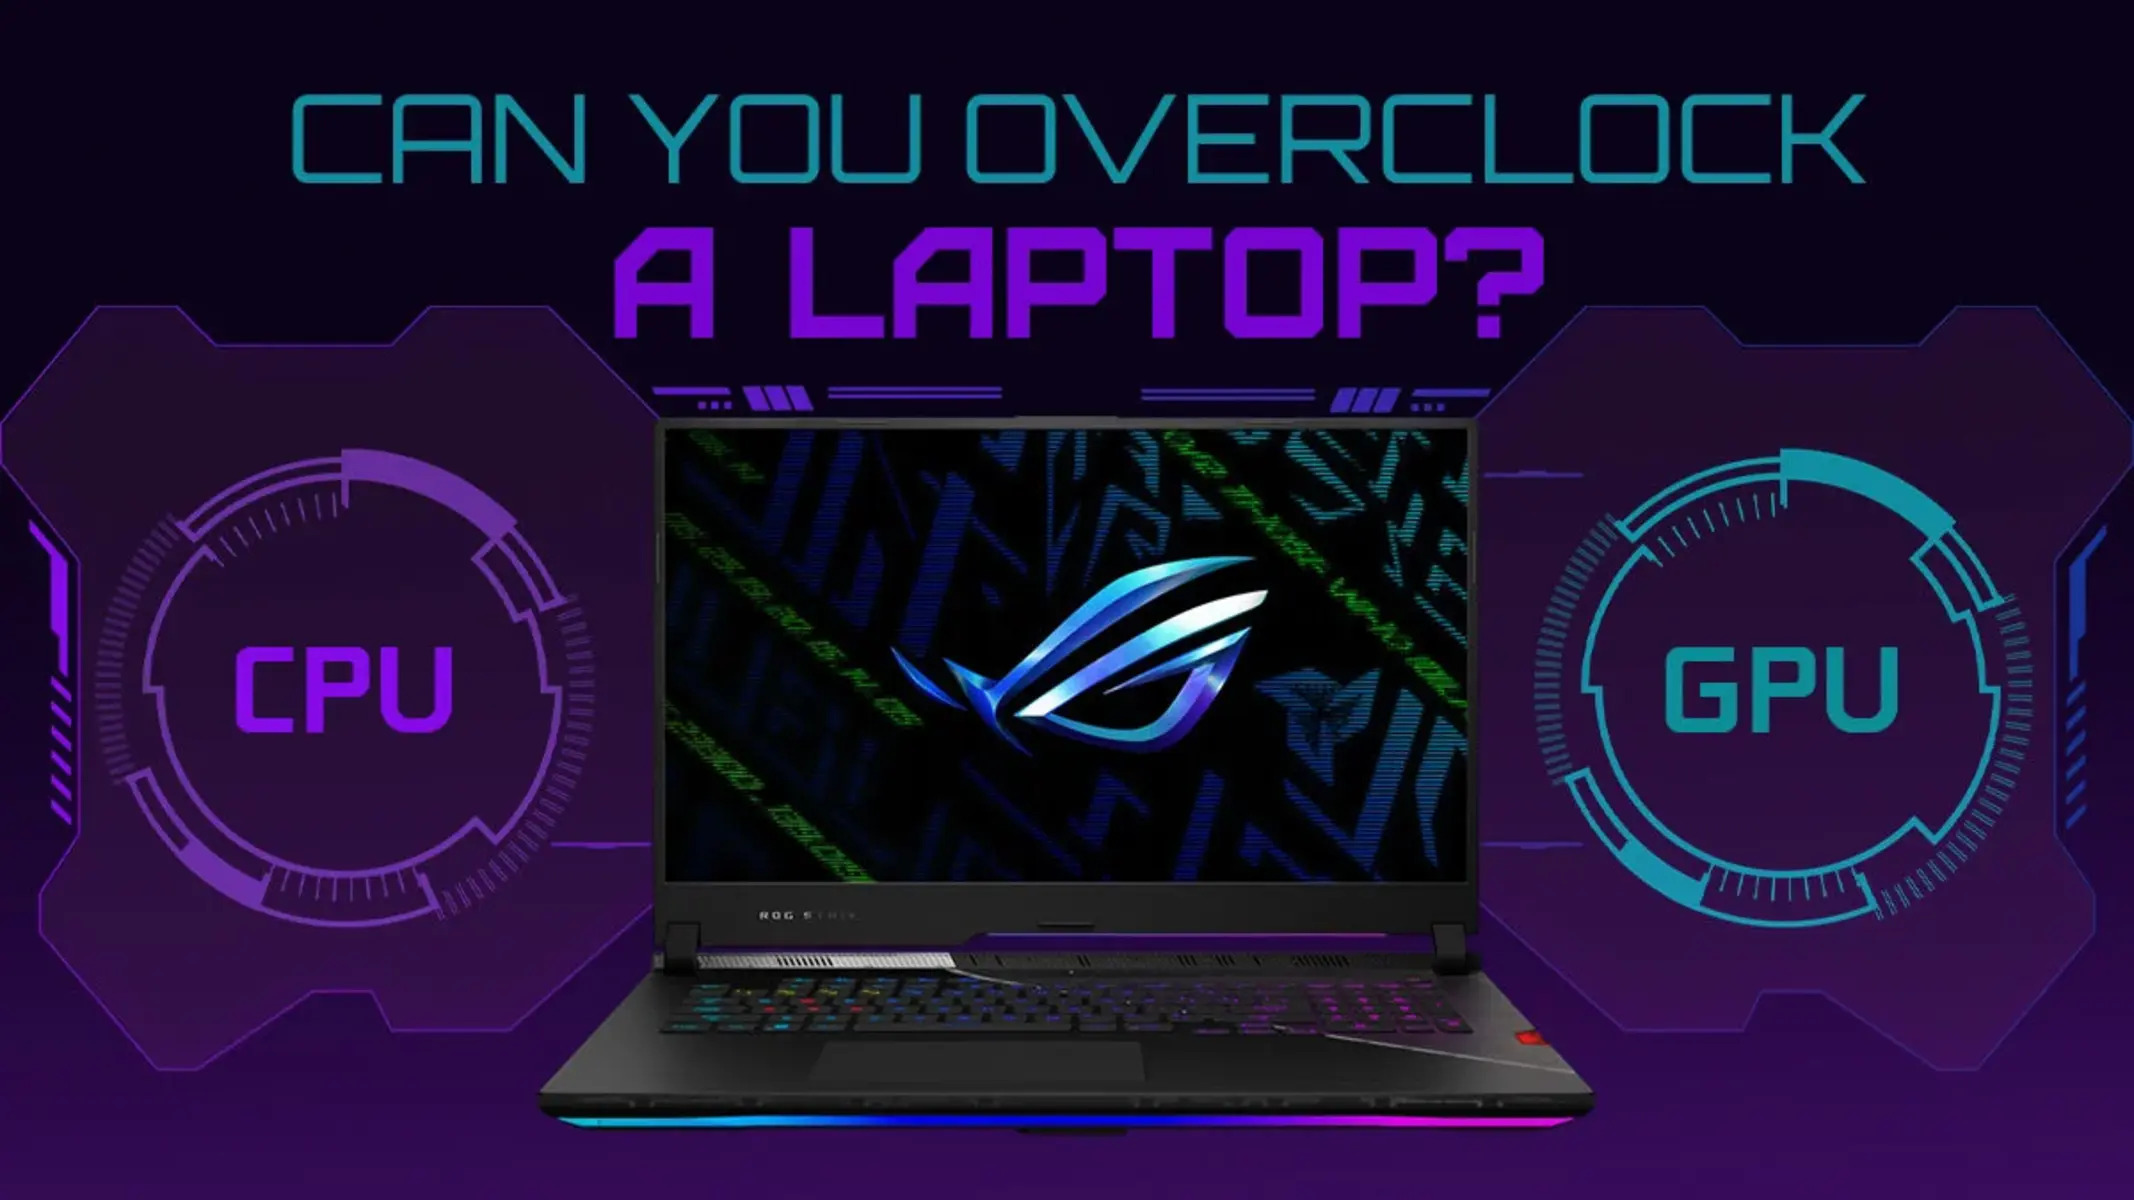 How To Overclock A Laptop